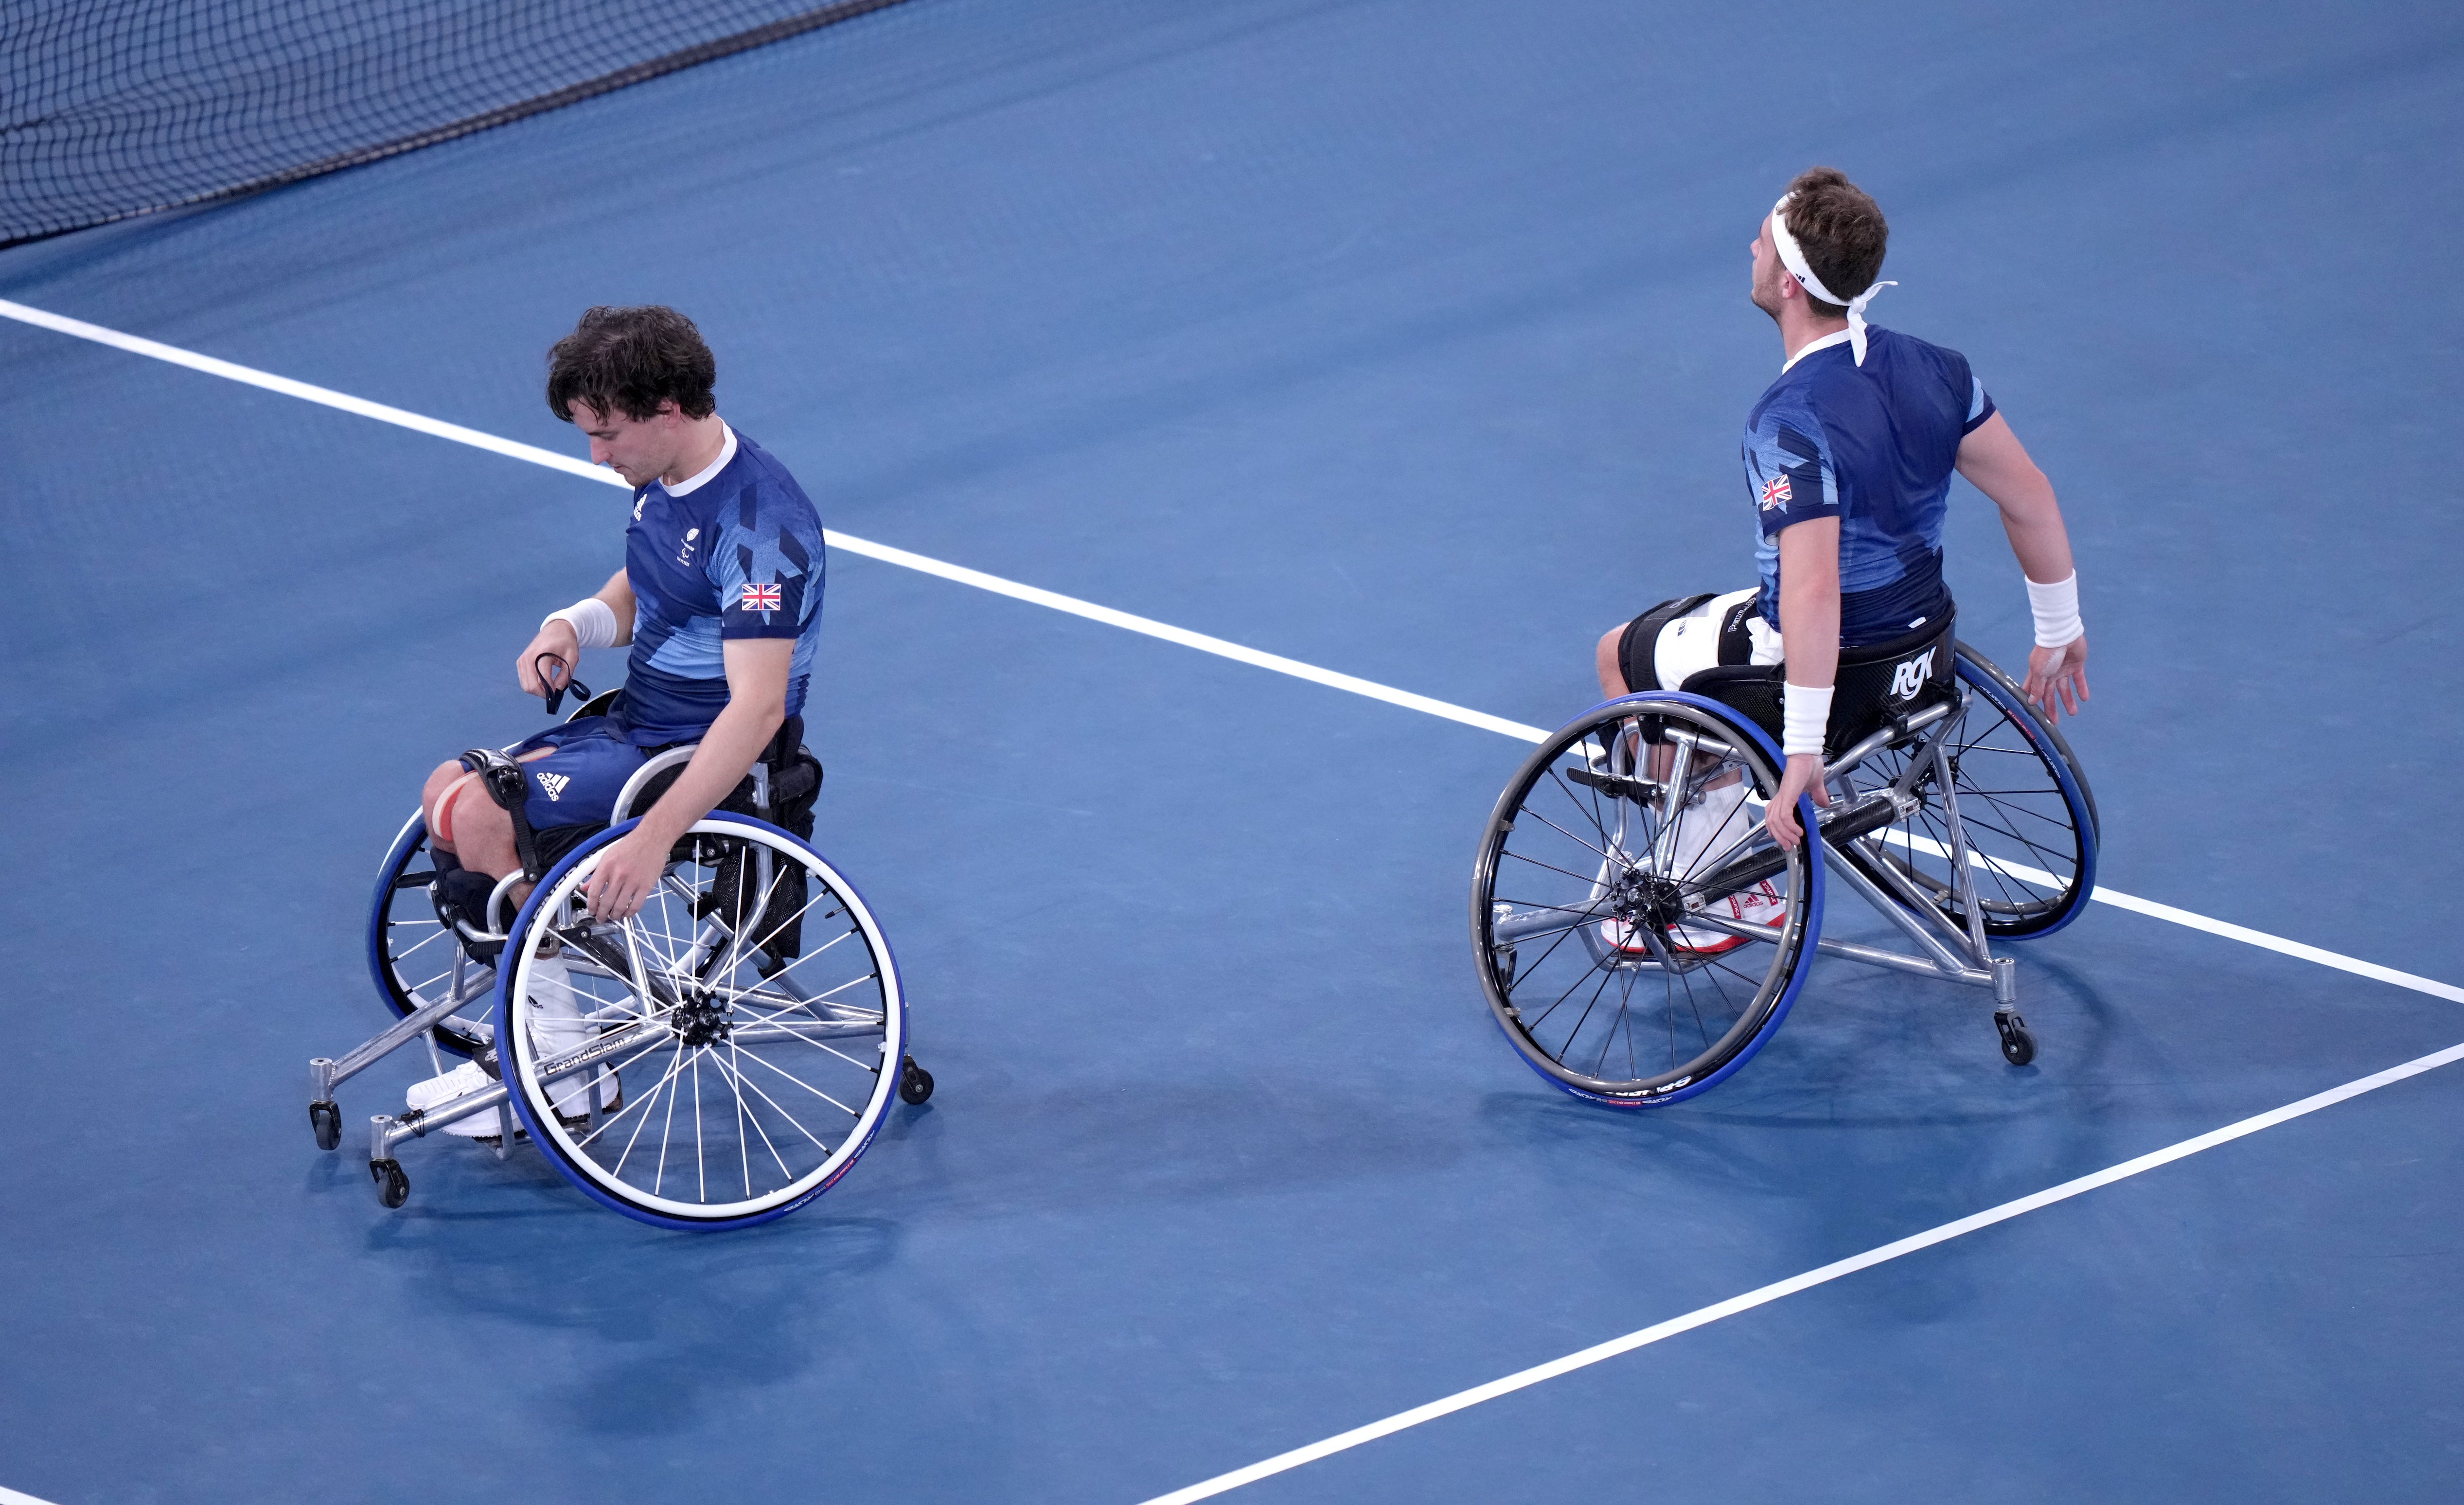 Gordon Reid, left, and Alfie Hewett are left devastated on Friday after suffering a second successive doubles final defeat